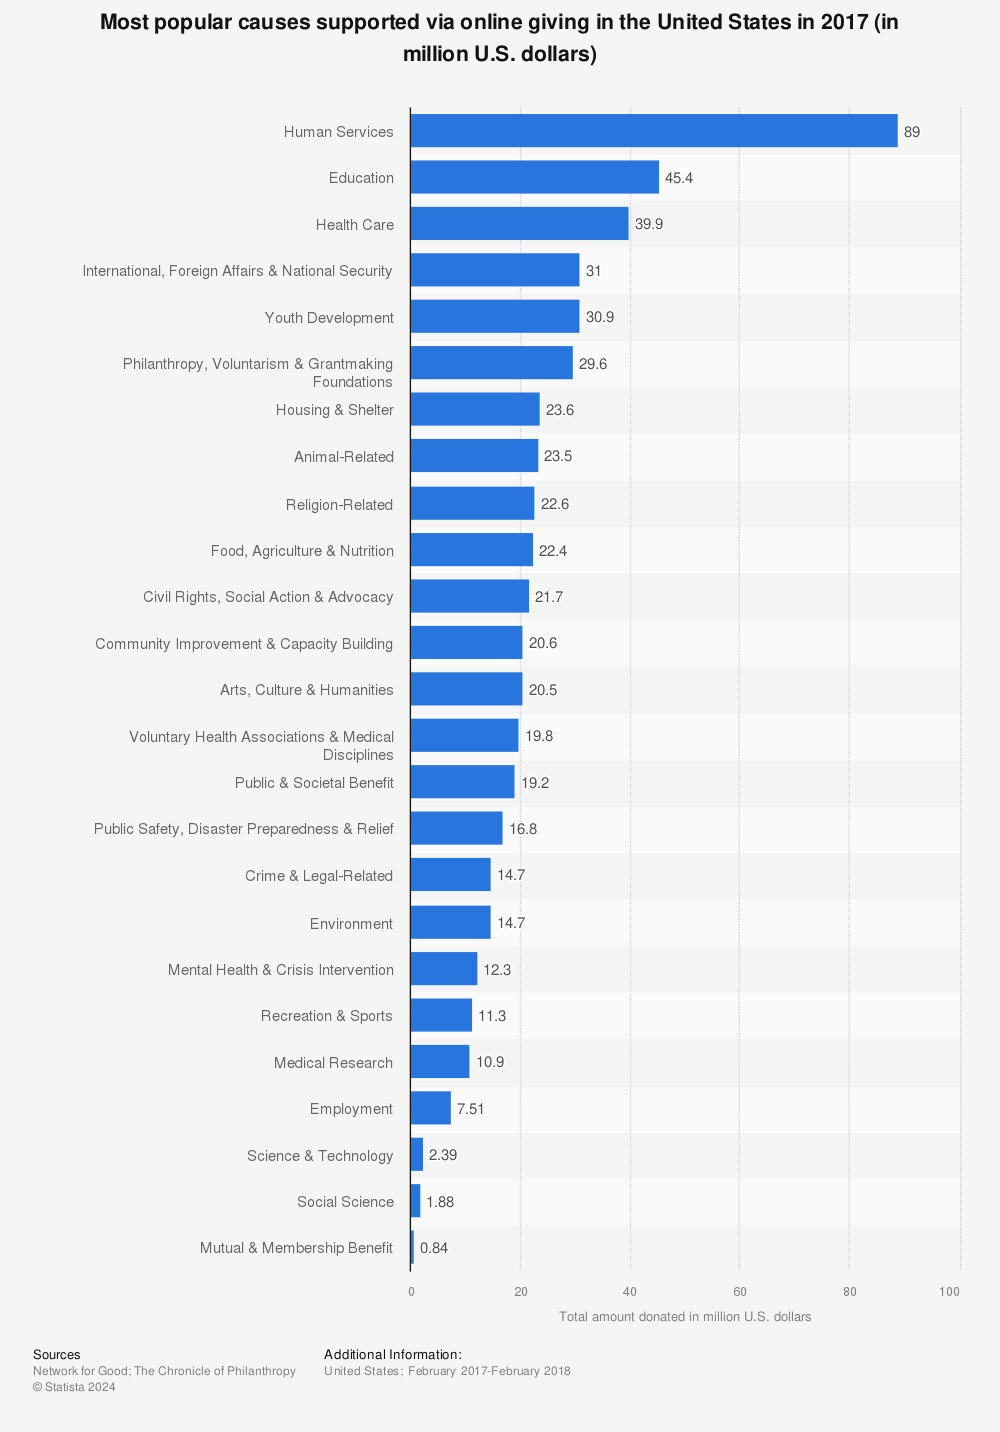 Statistic: Most popular causes supported via online giving in the United States in 2017 (in million U.S. dollars) | Statista